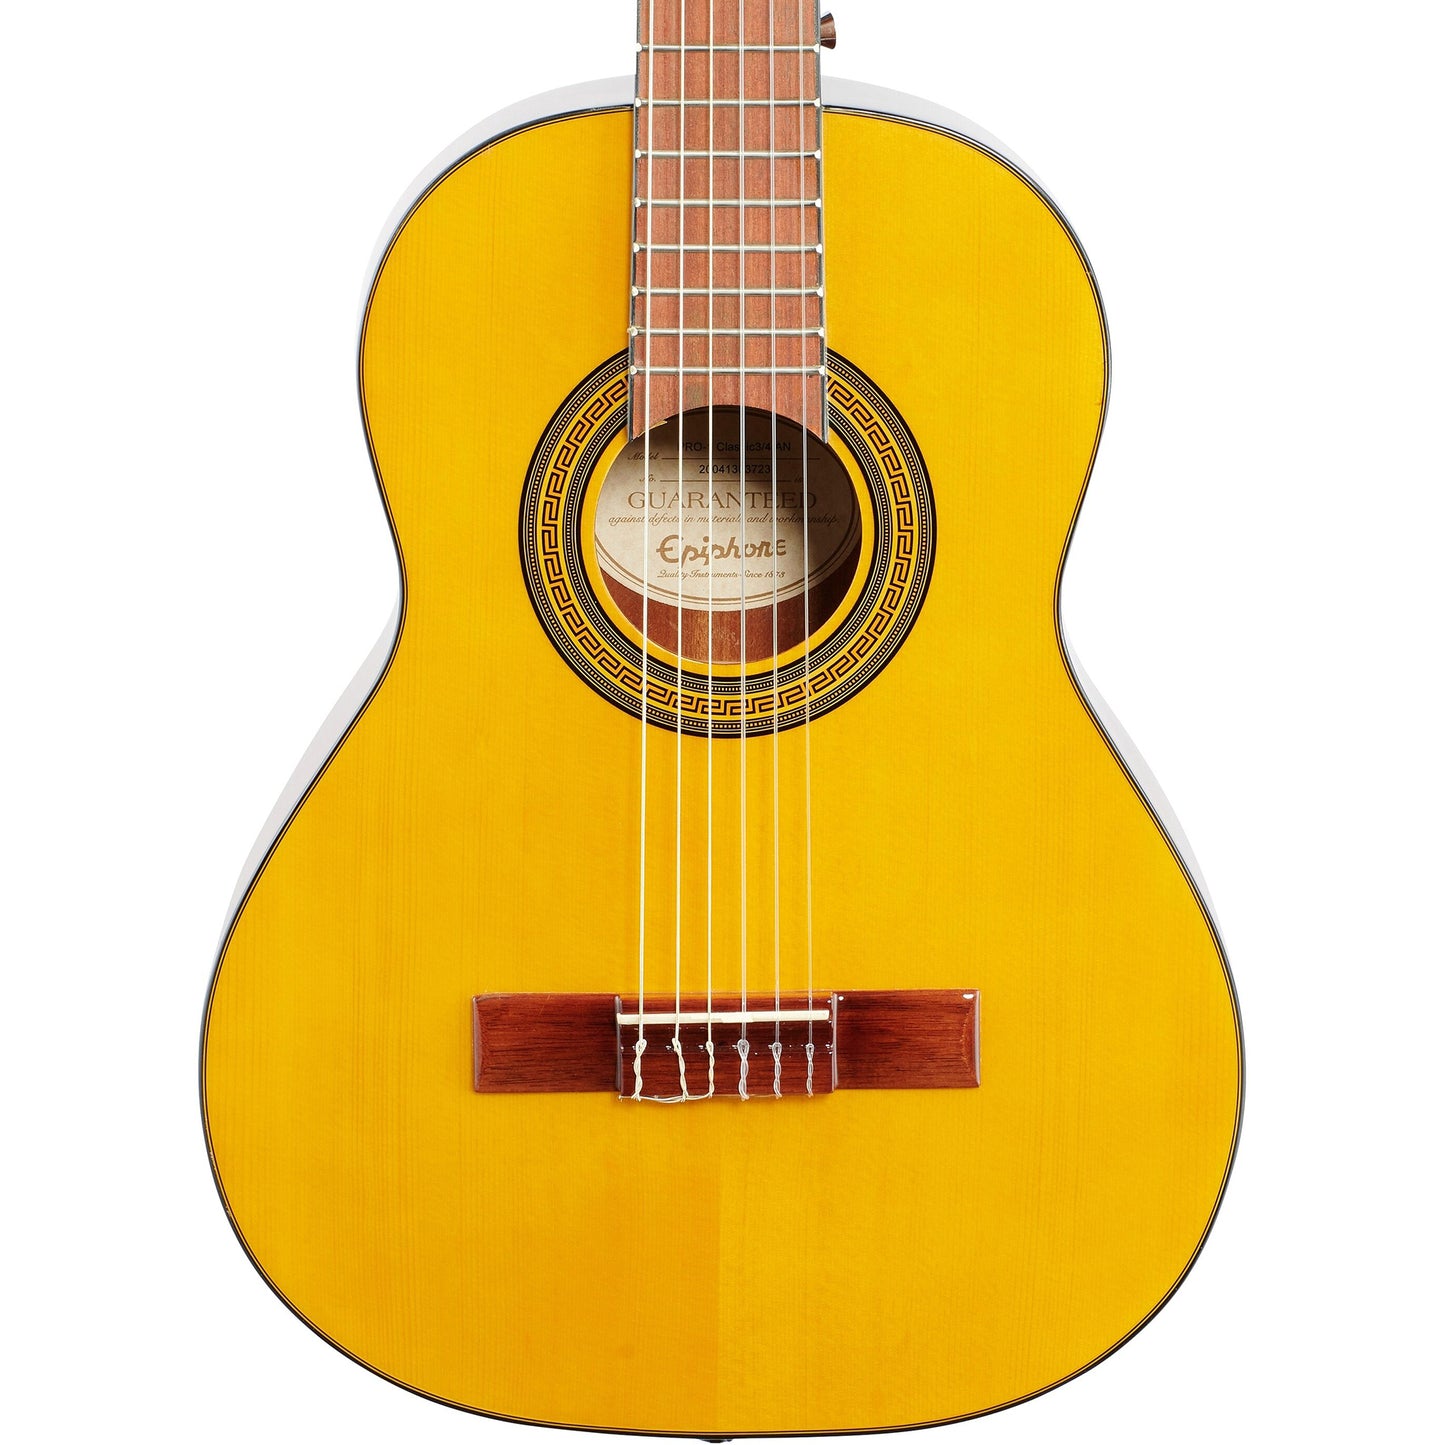 Epiphone EAC3ANCH1 PRO-1 Classic 3/4 Size Nylon String Acoustic Guitar, Natural